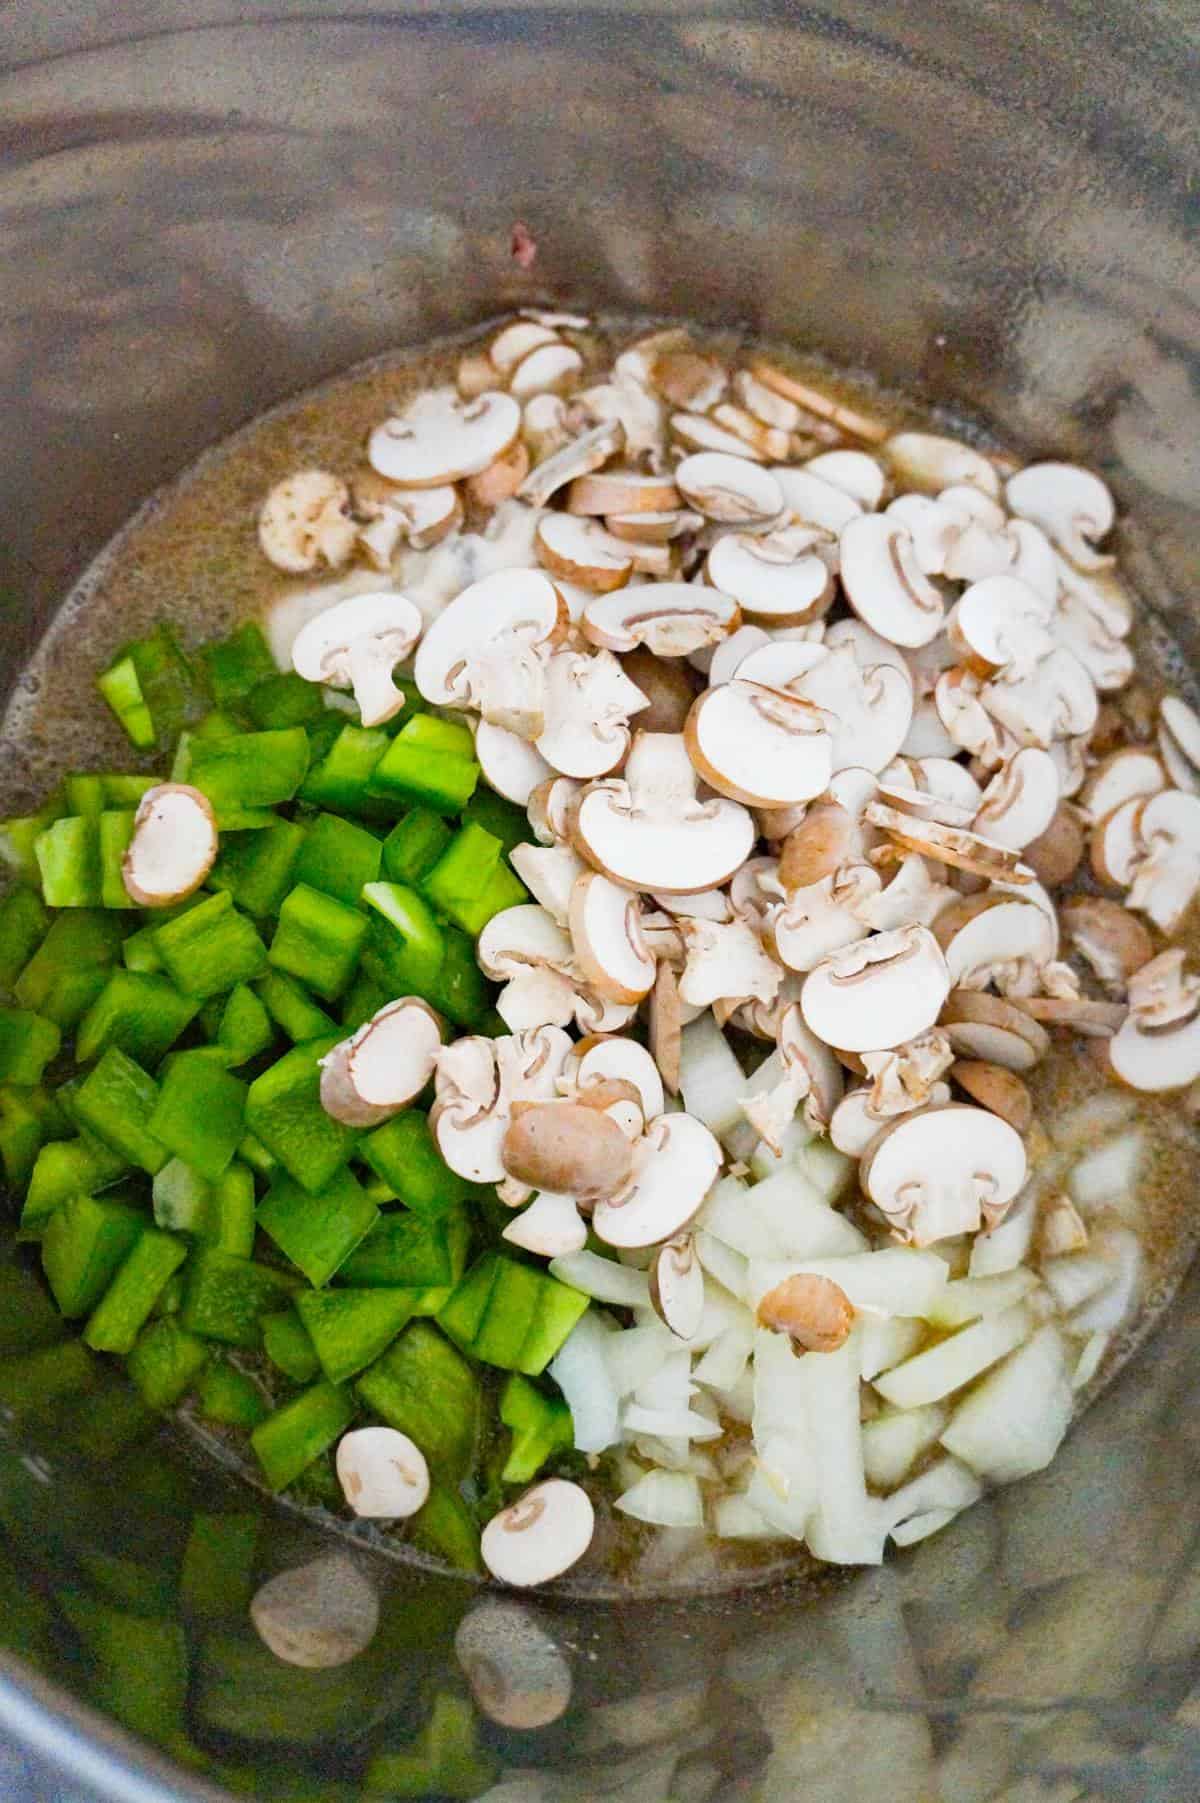 diced green peppers and sliced mushrooms on top of macaroni in an Instant Pot